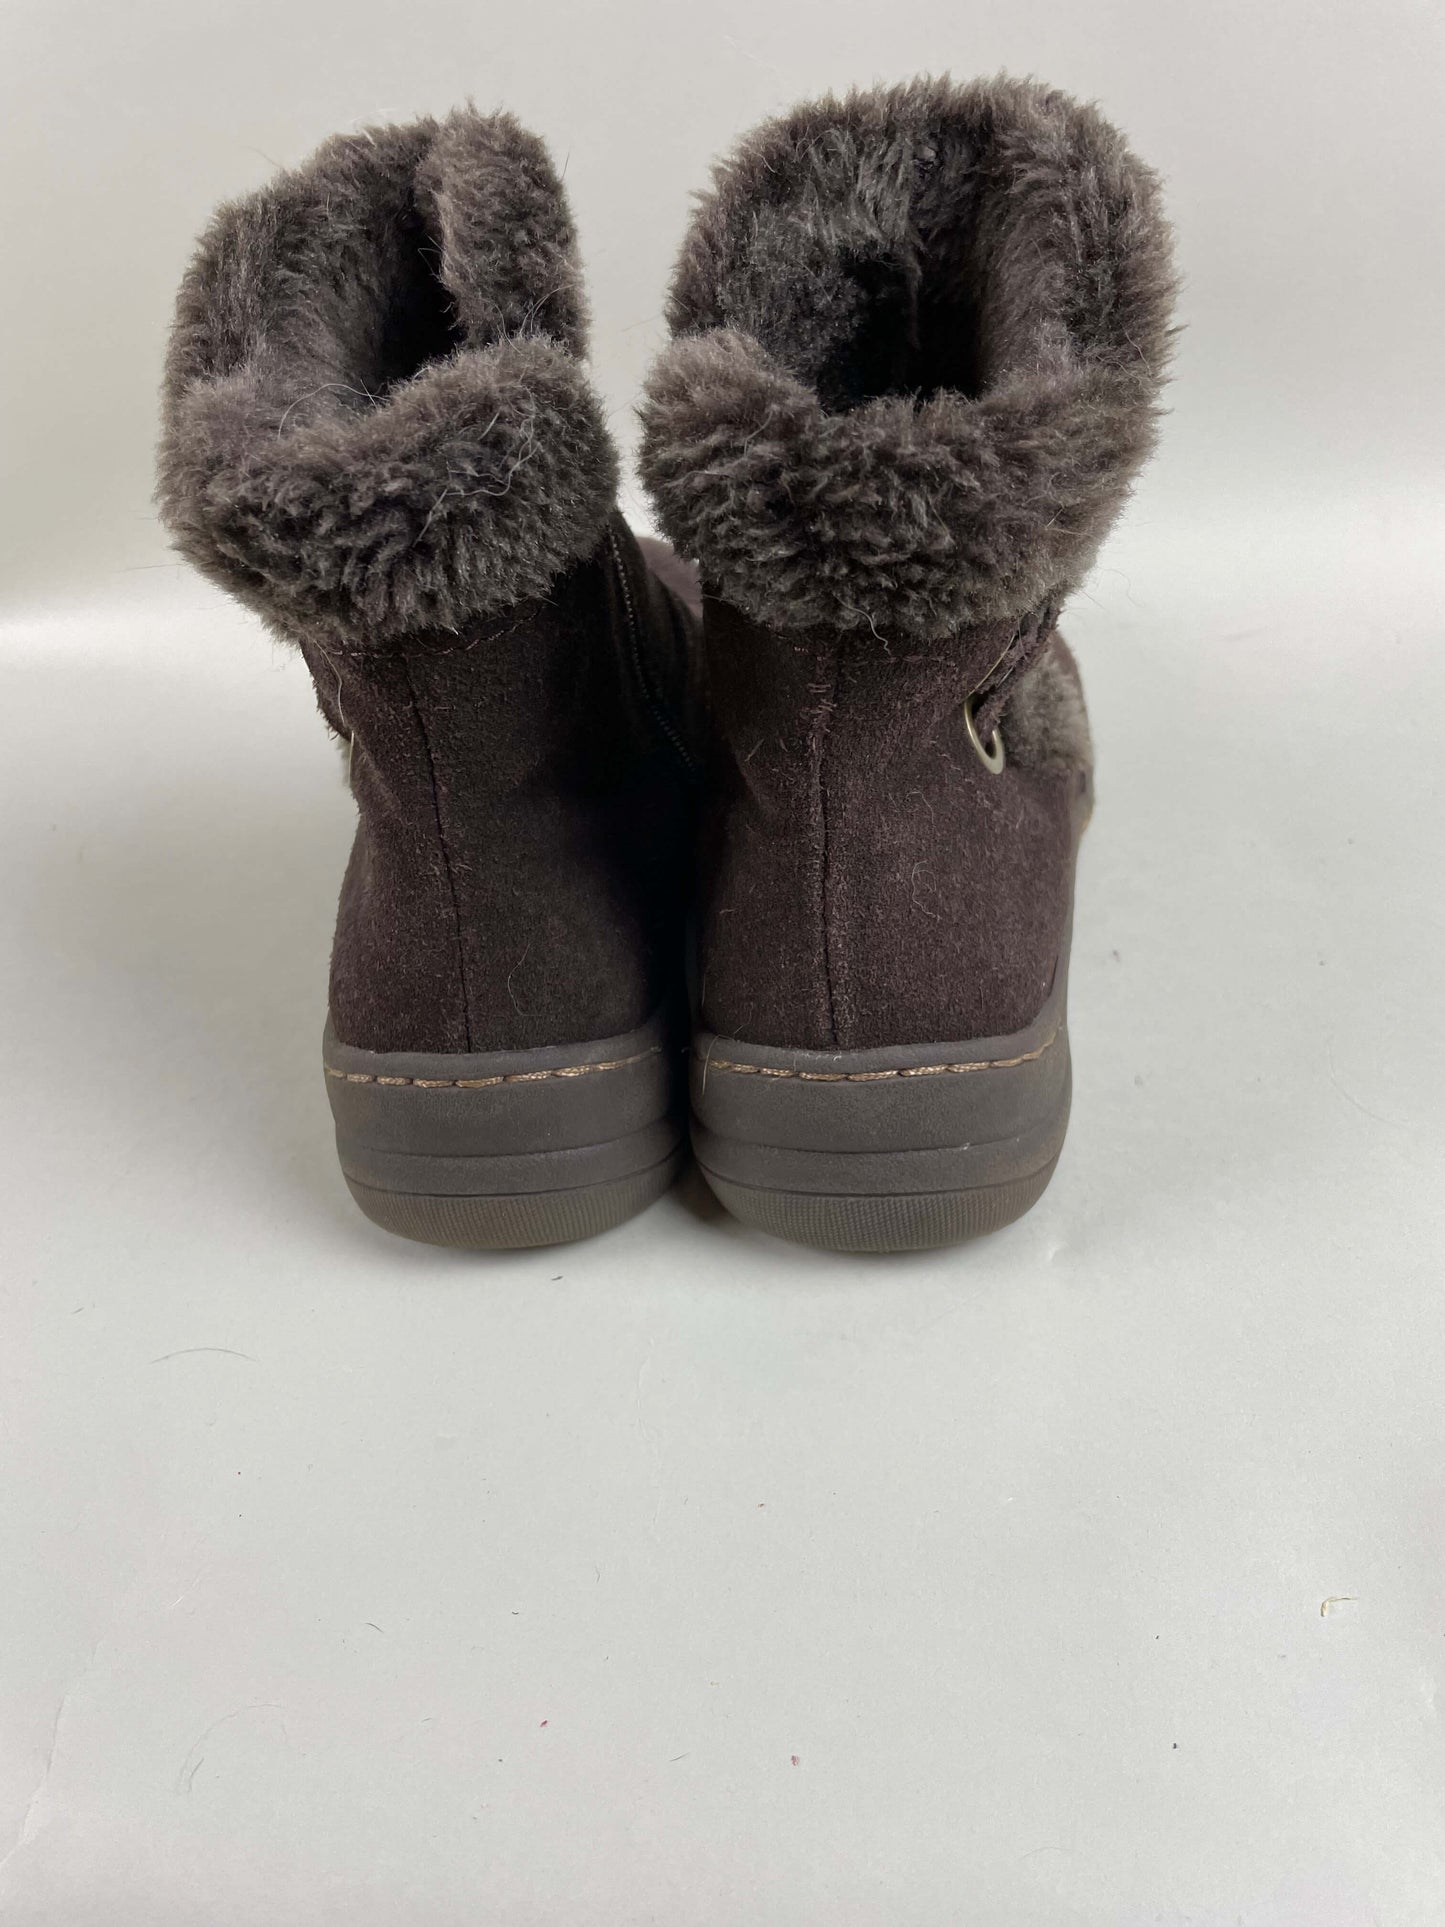 Bare Traps Fur-Lined Booties Size 7.5